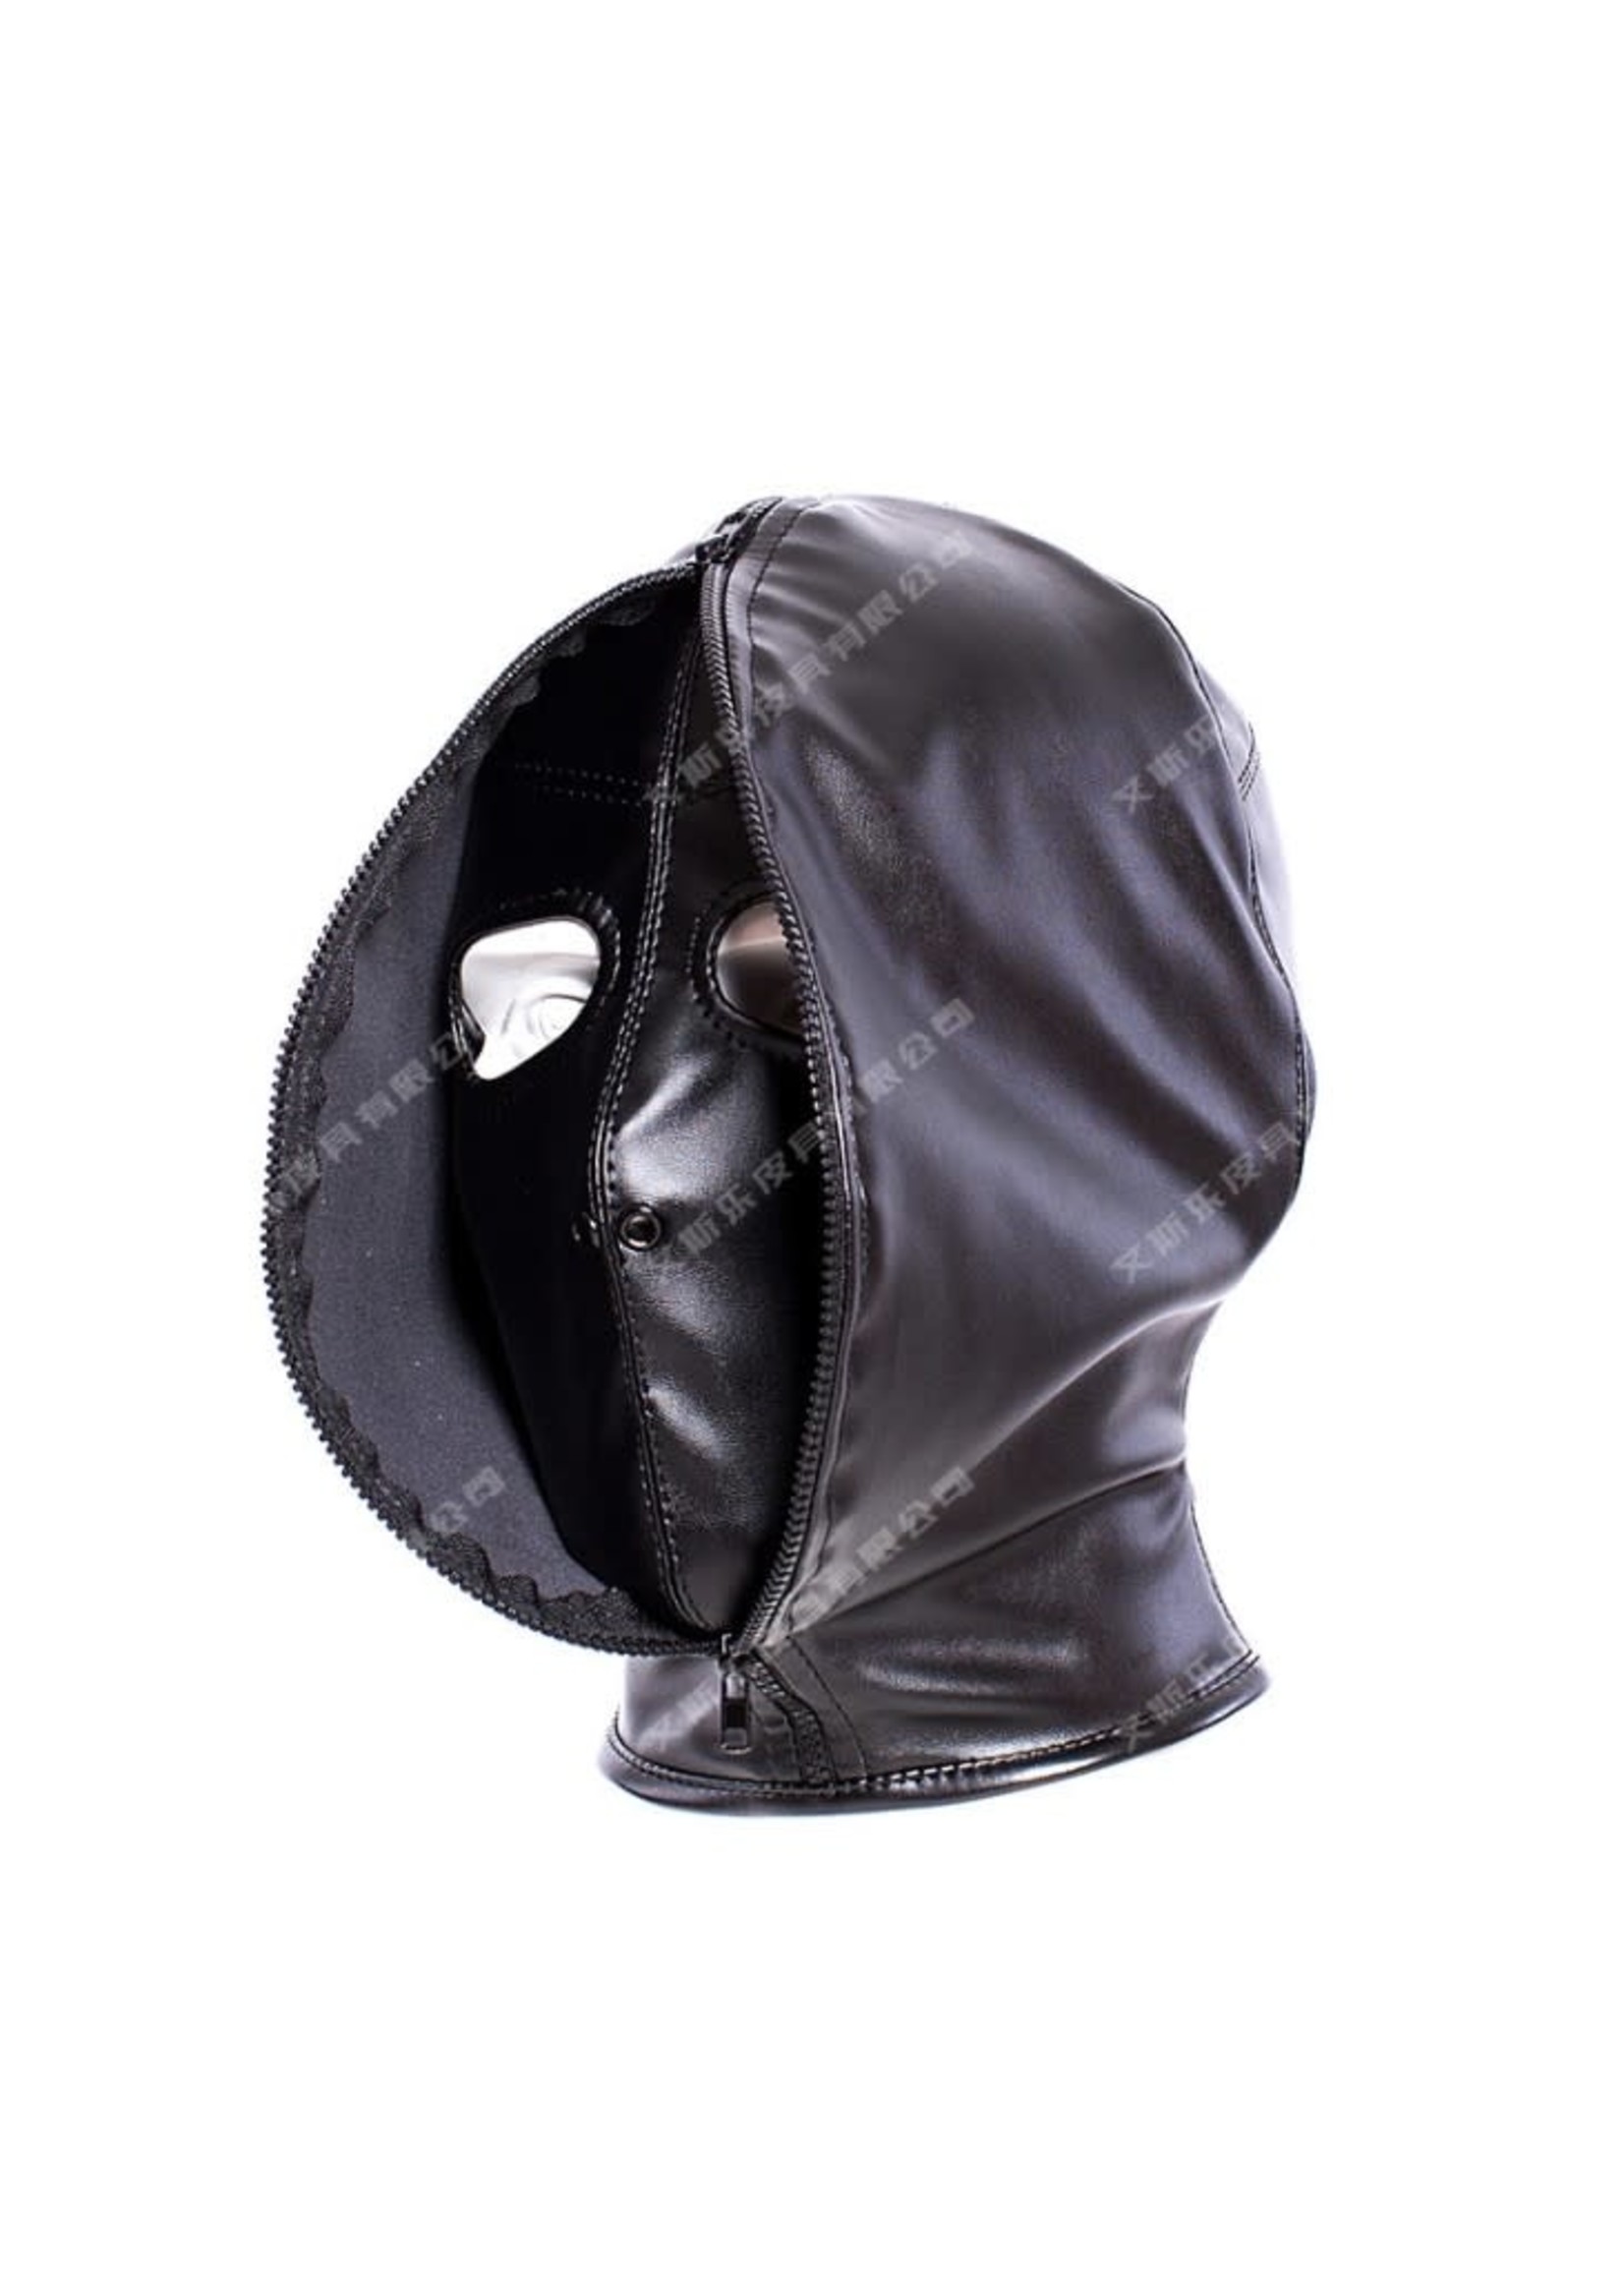 Leather Full Face Hood - Double Layer Zip Up Mask